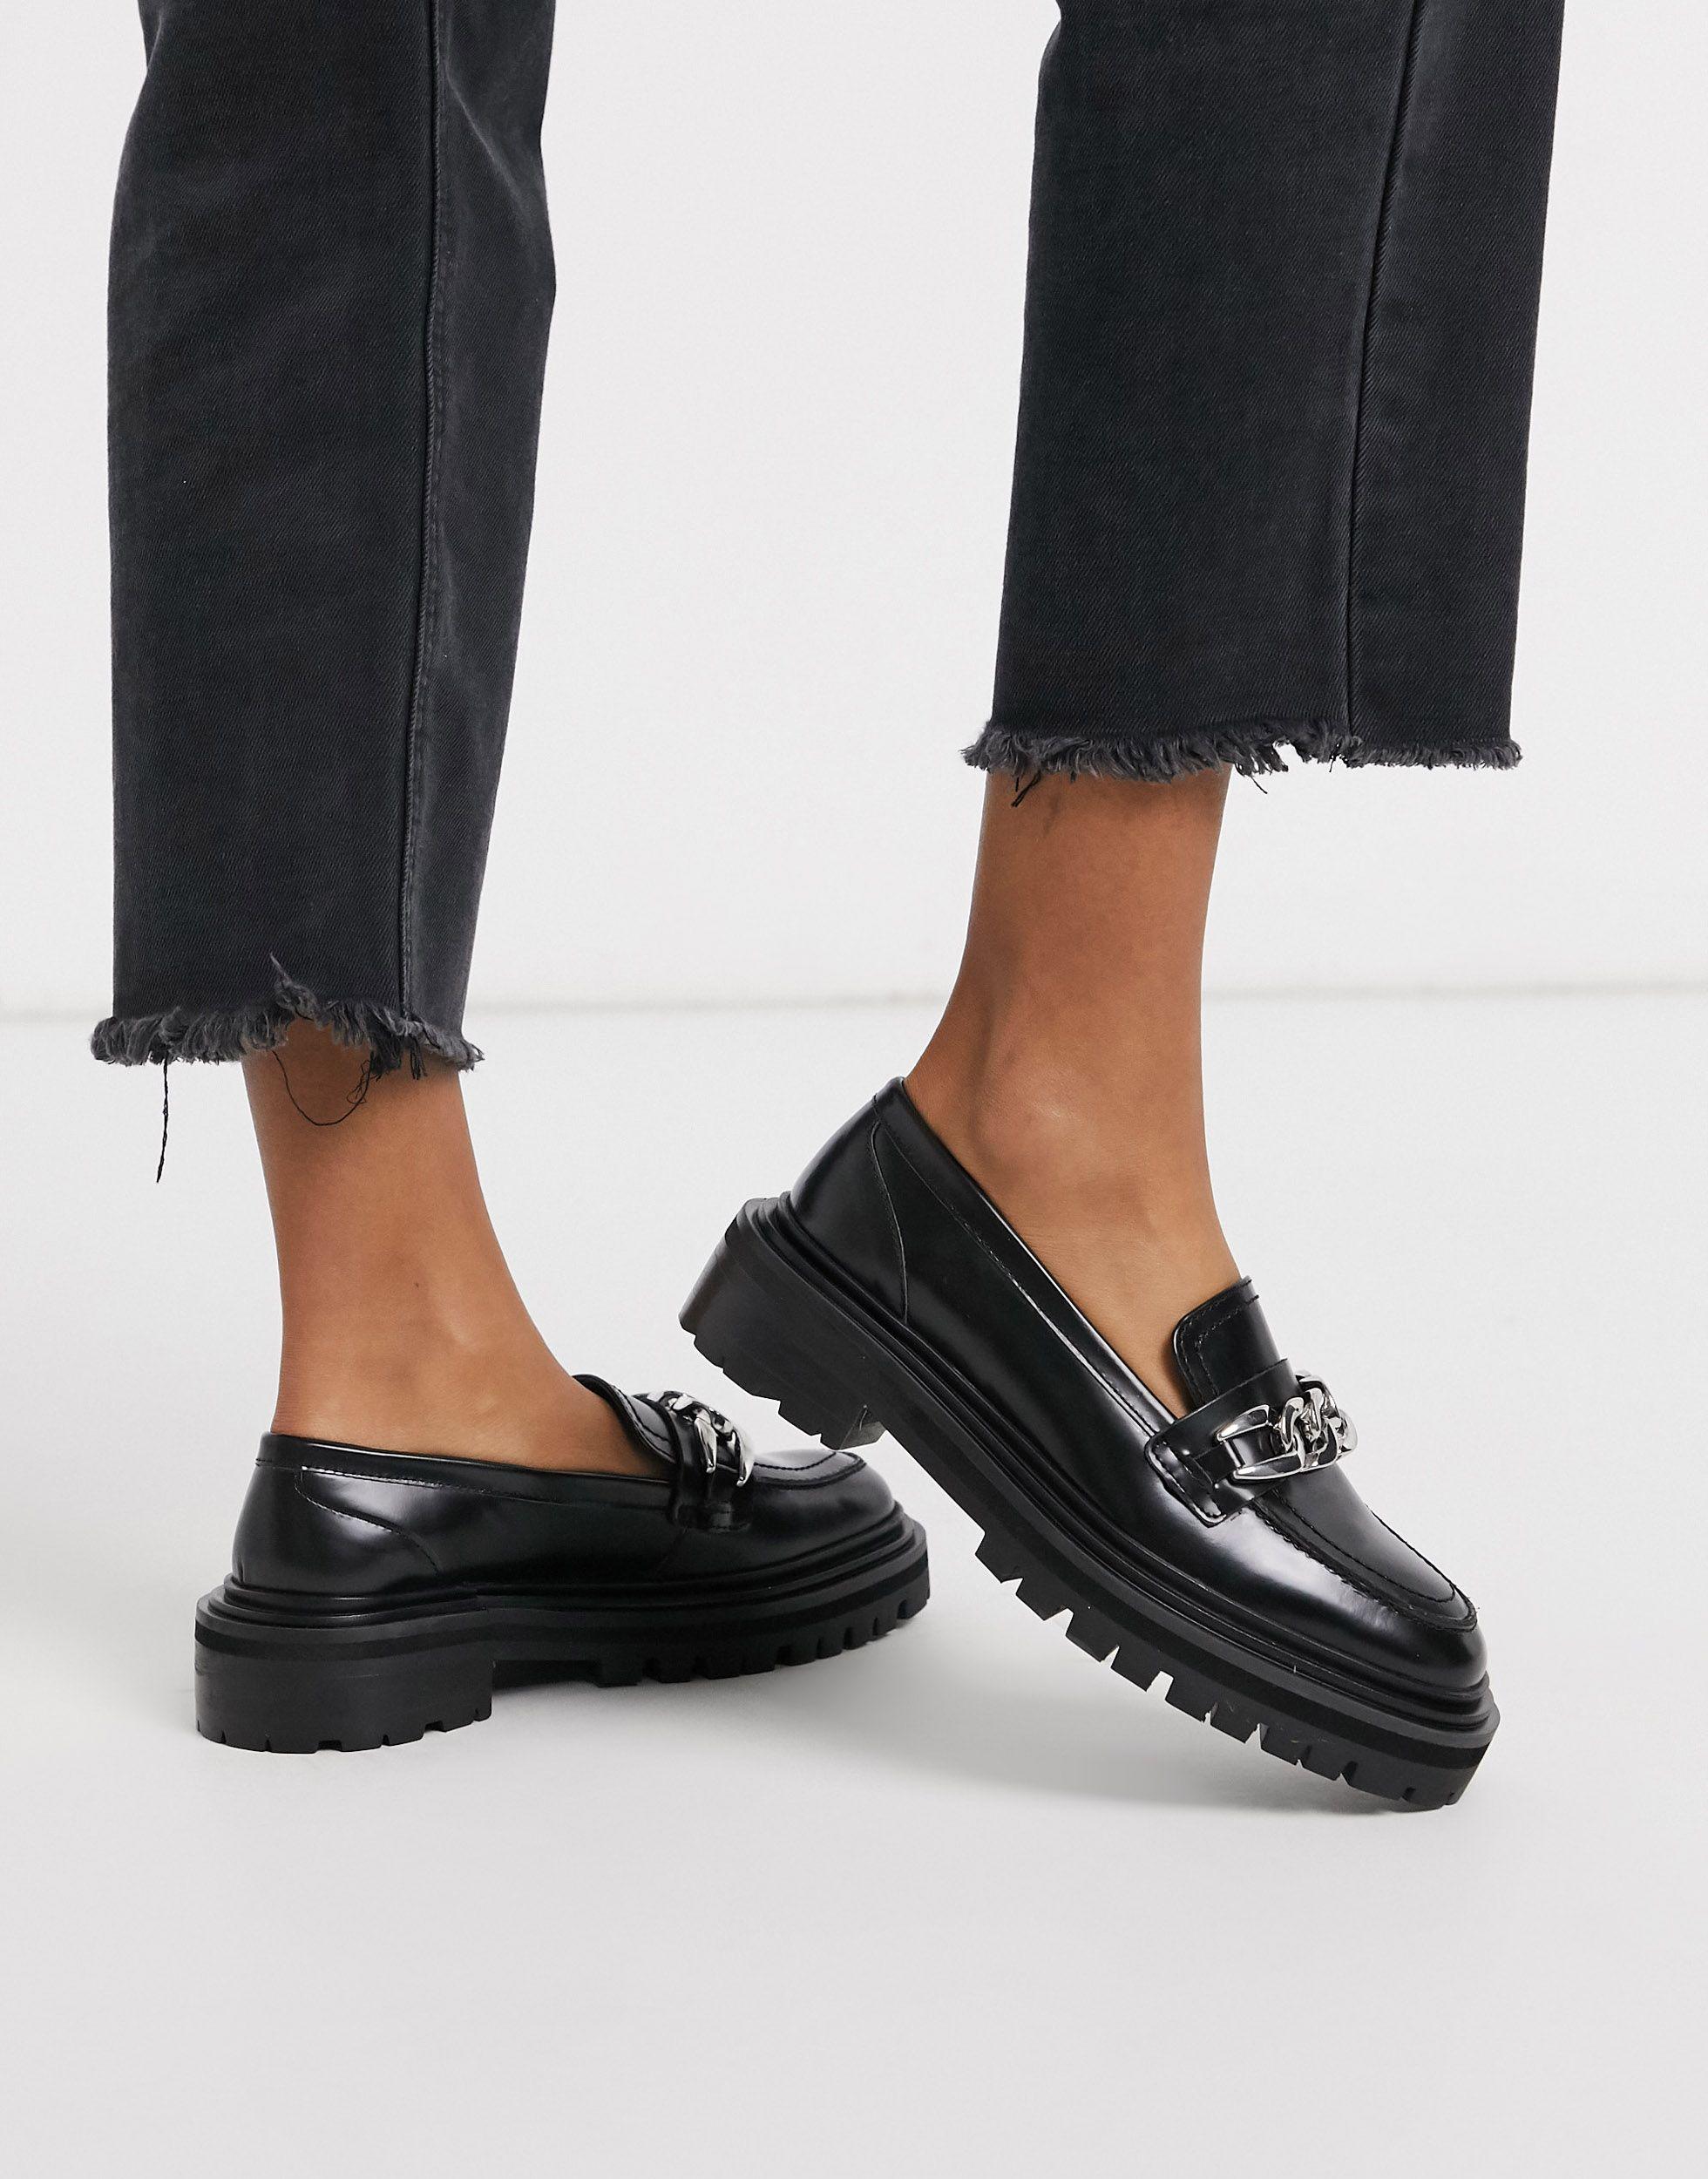 ASOS Mystery Premium Leather Chunky Flat Shoes With Chain in Black - Lyst